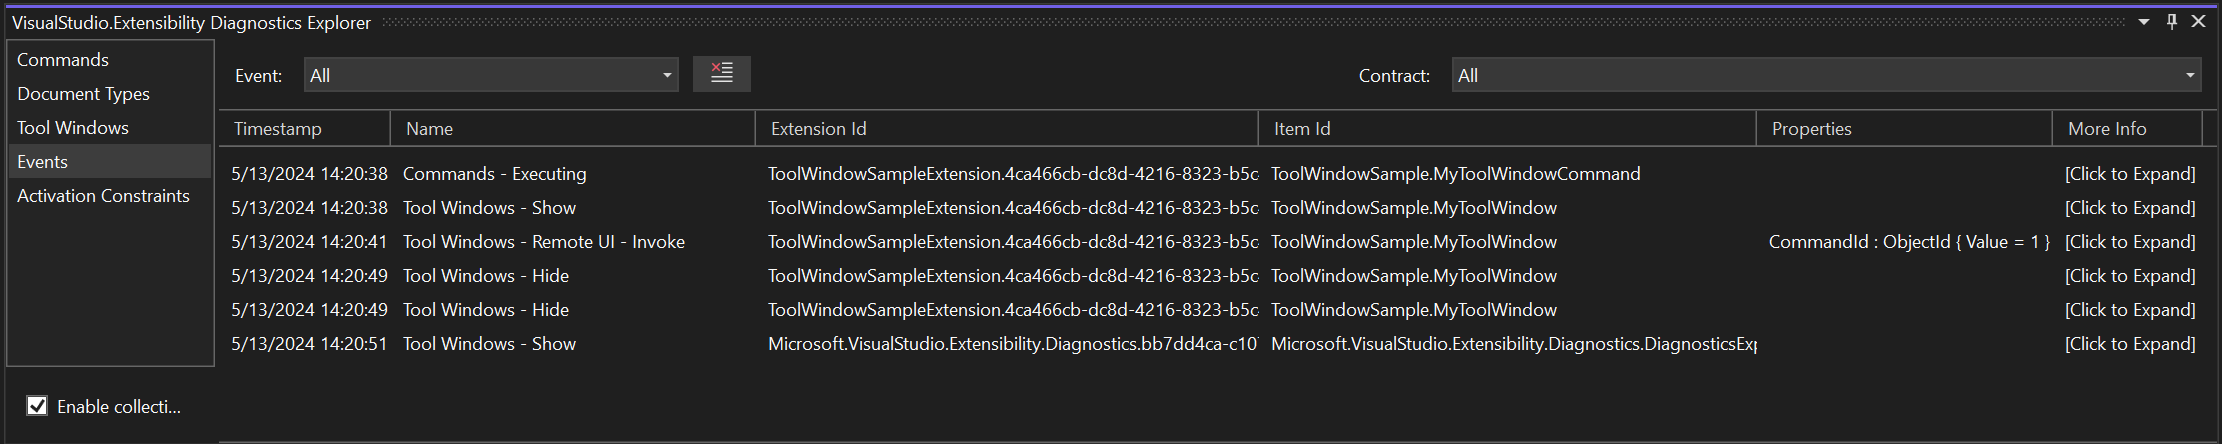 A screenshot of the Events tab of the VisualStudio.Extensibility Diagnostics Explorer, which shows several events related to executing a command and hiding/showing tool windows.